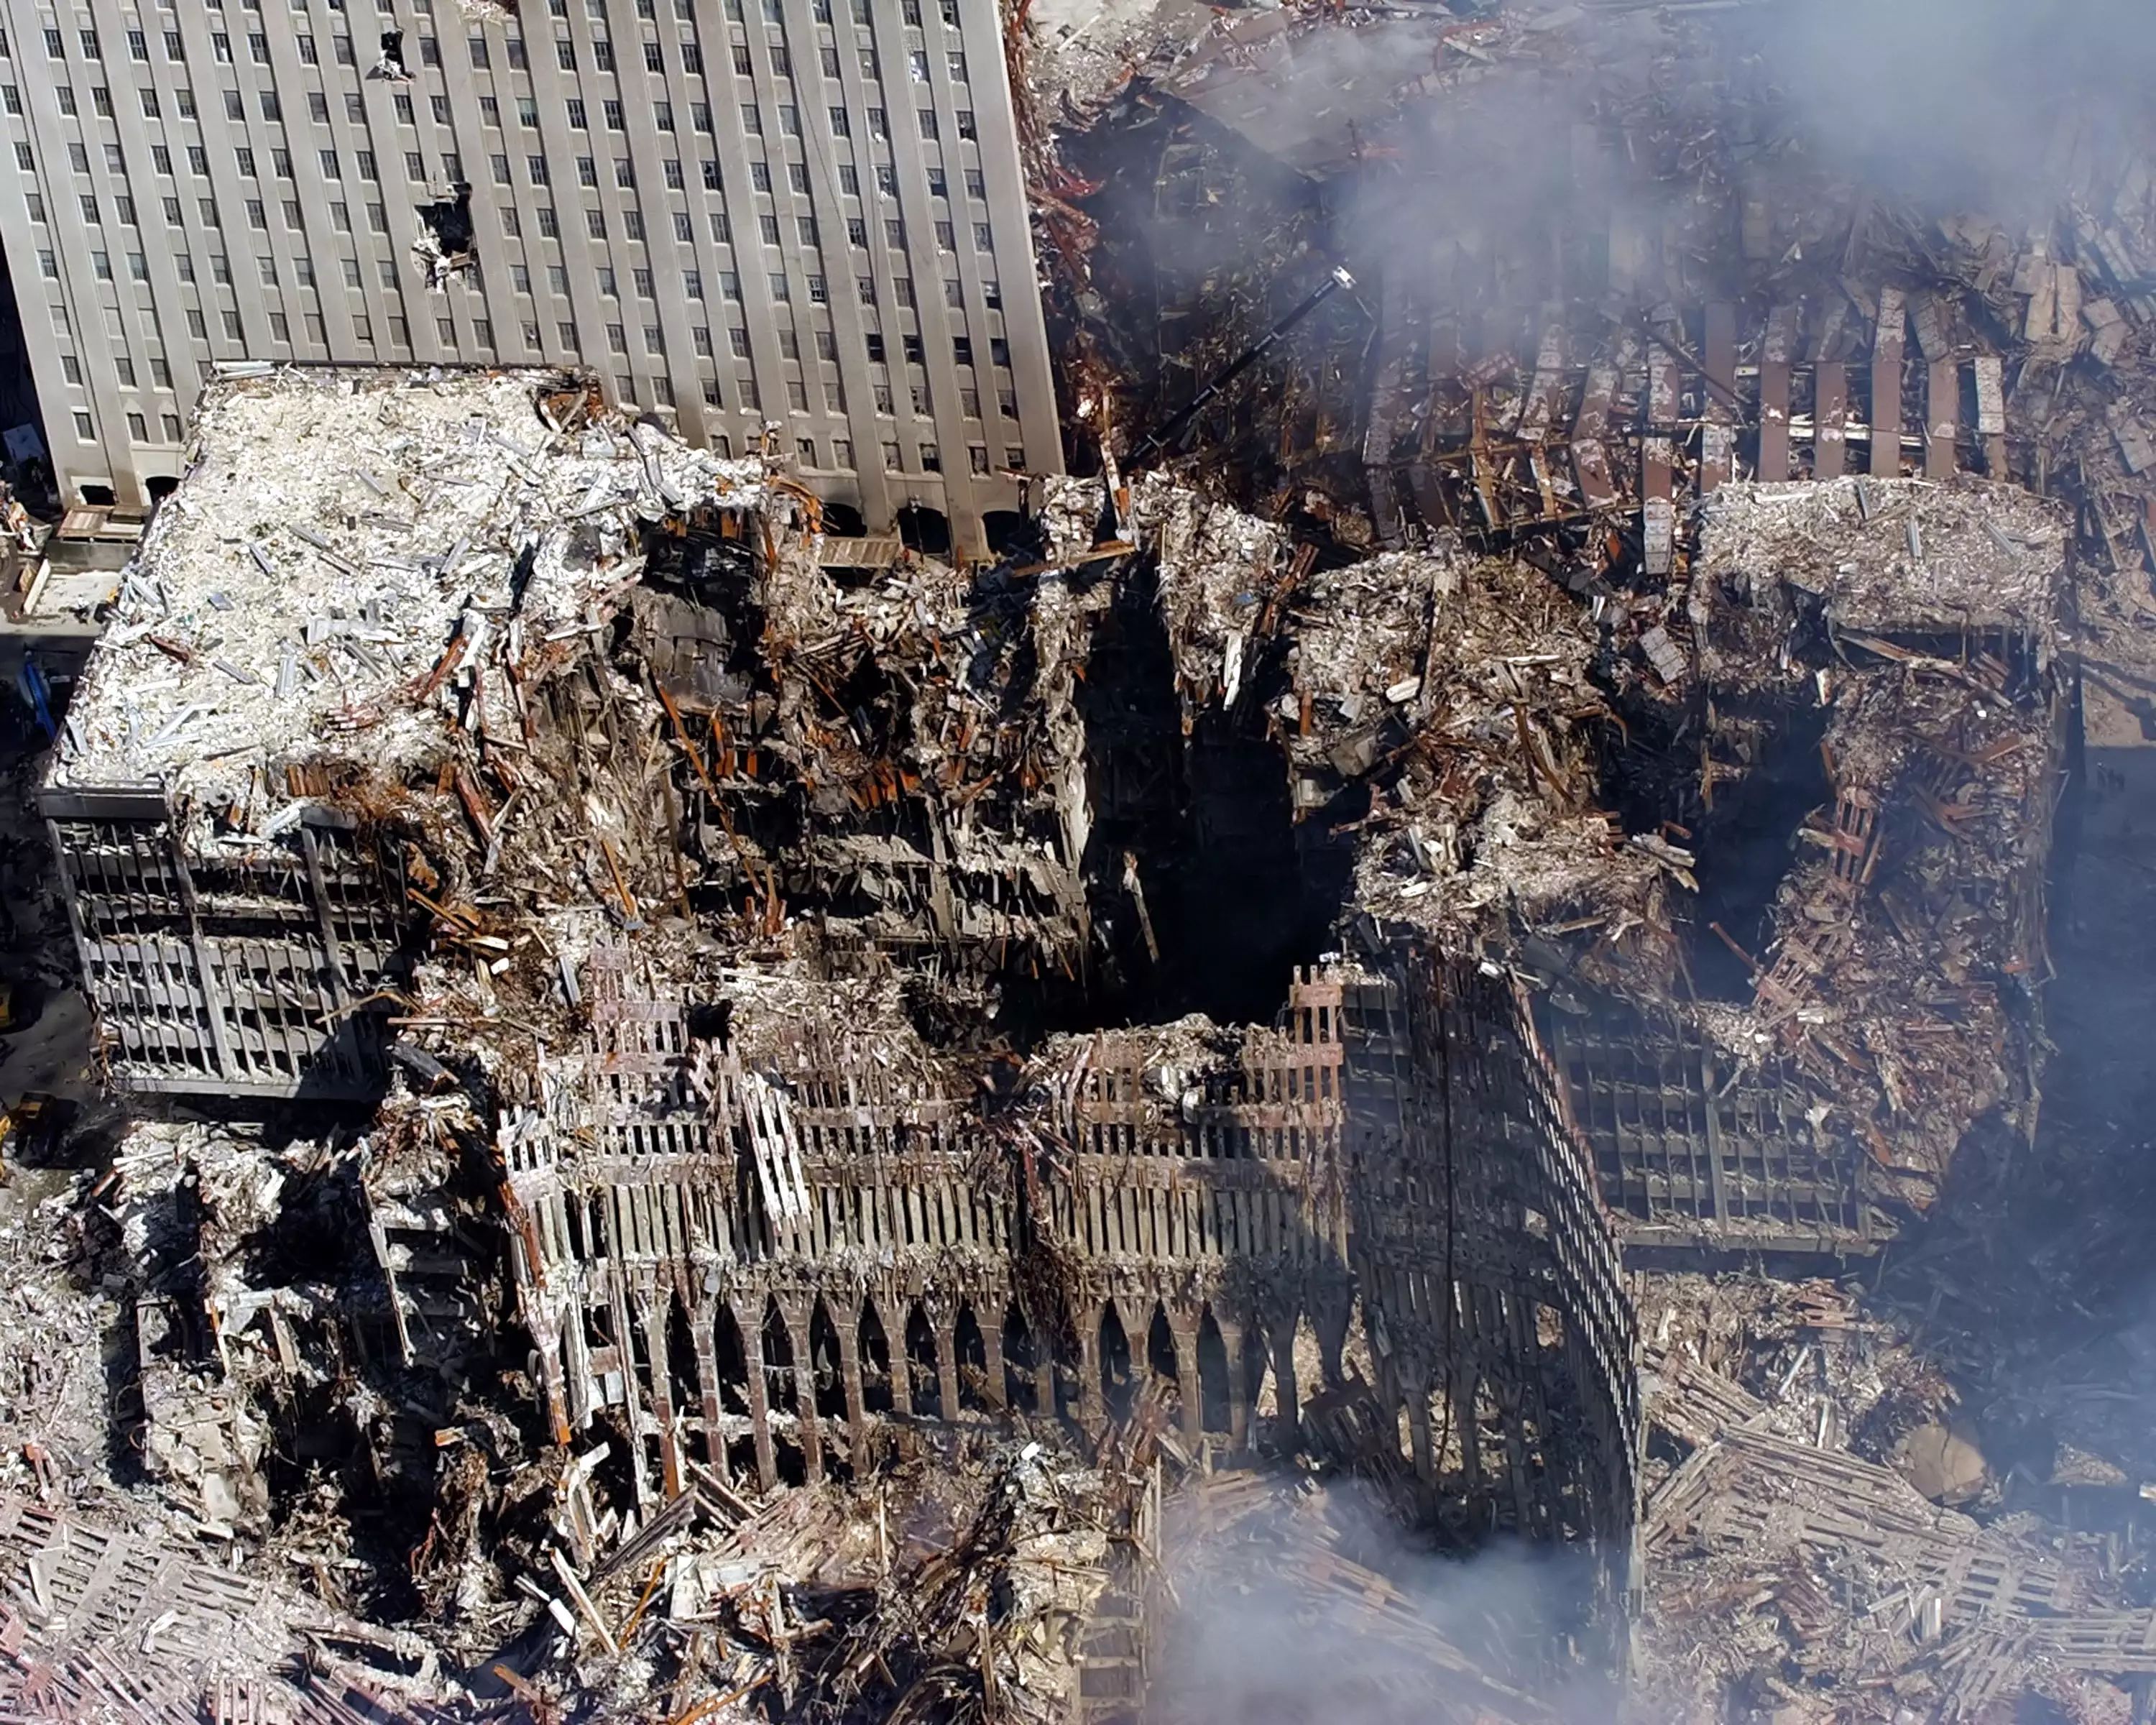 The Twin Towers were completely destroyed, changing the skyline of NYC forever.